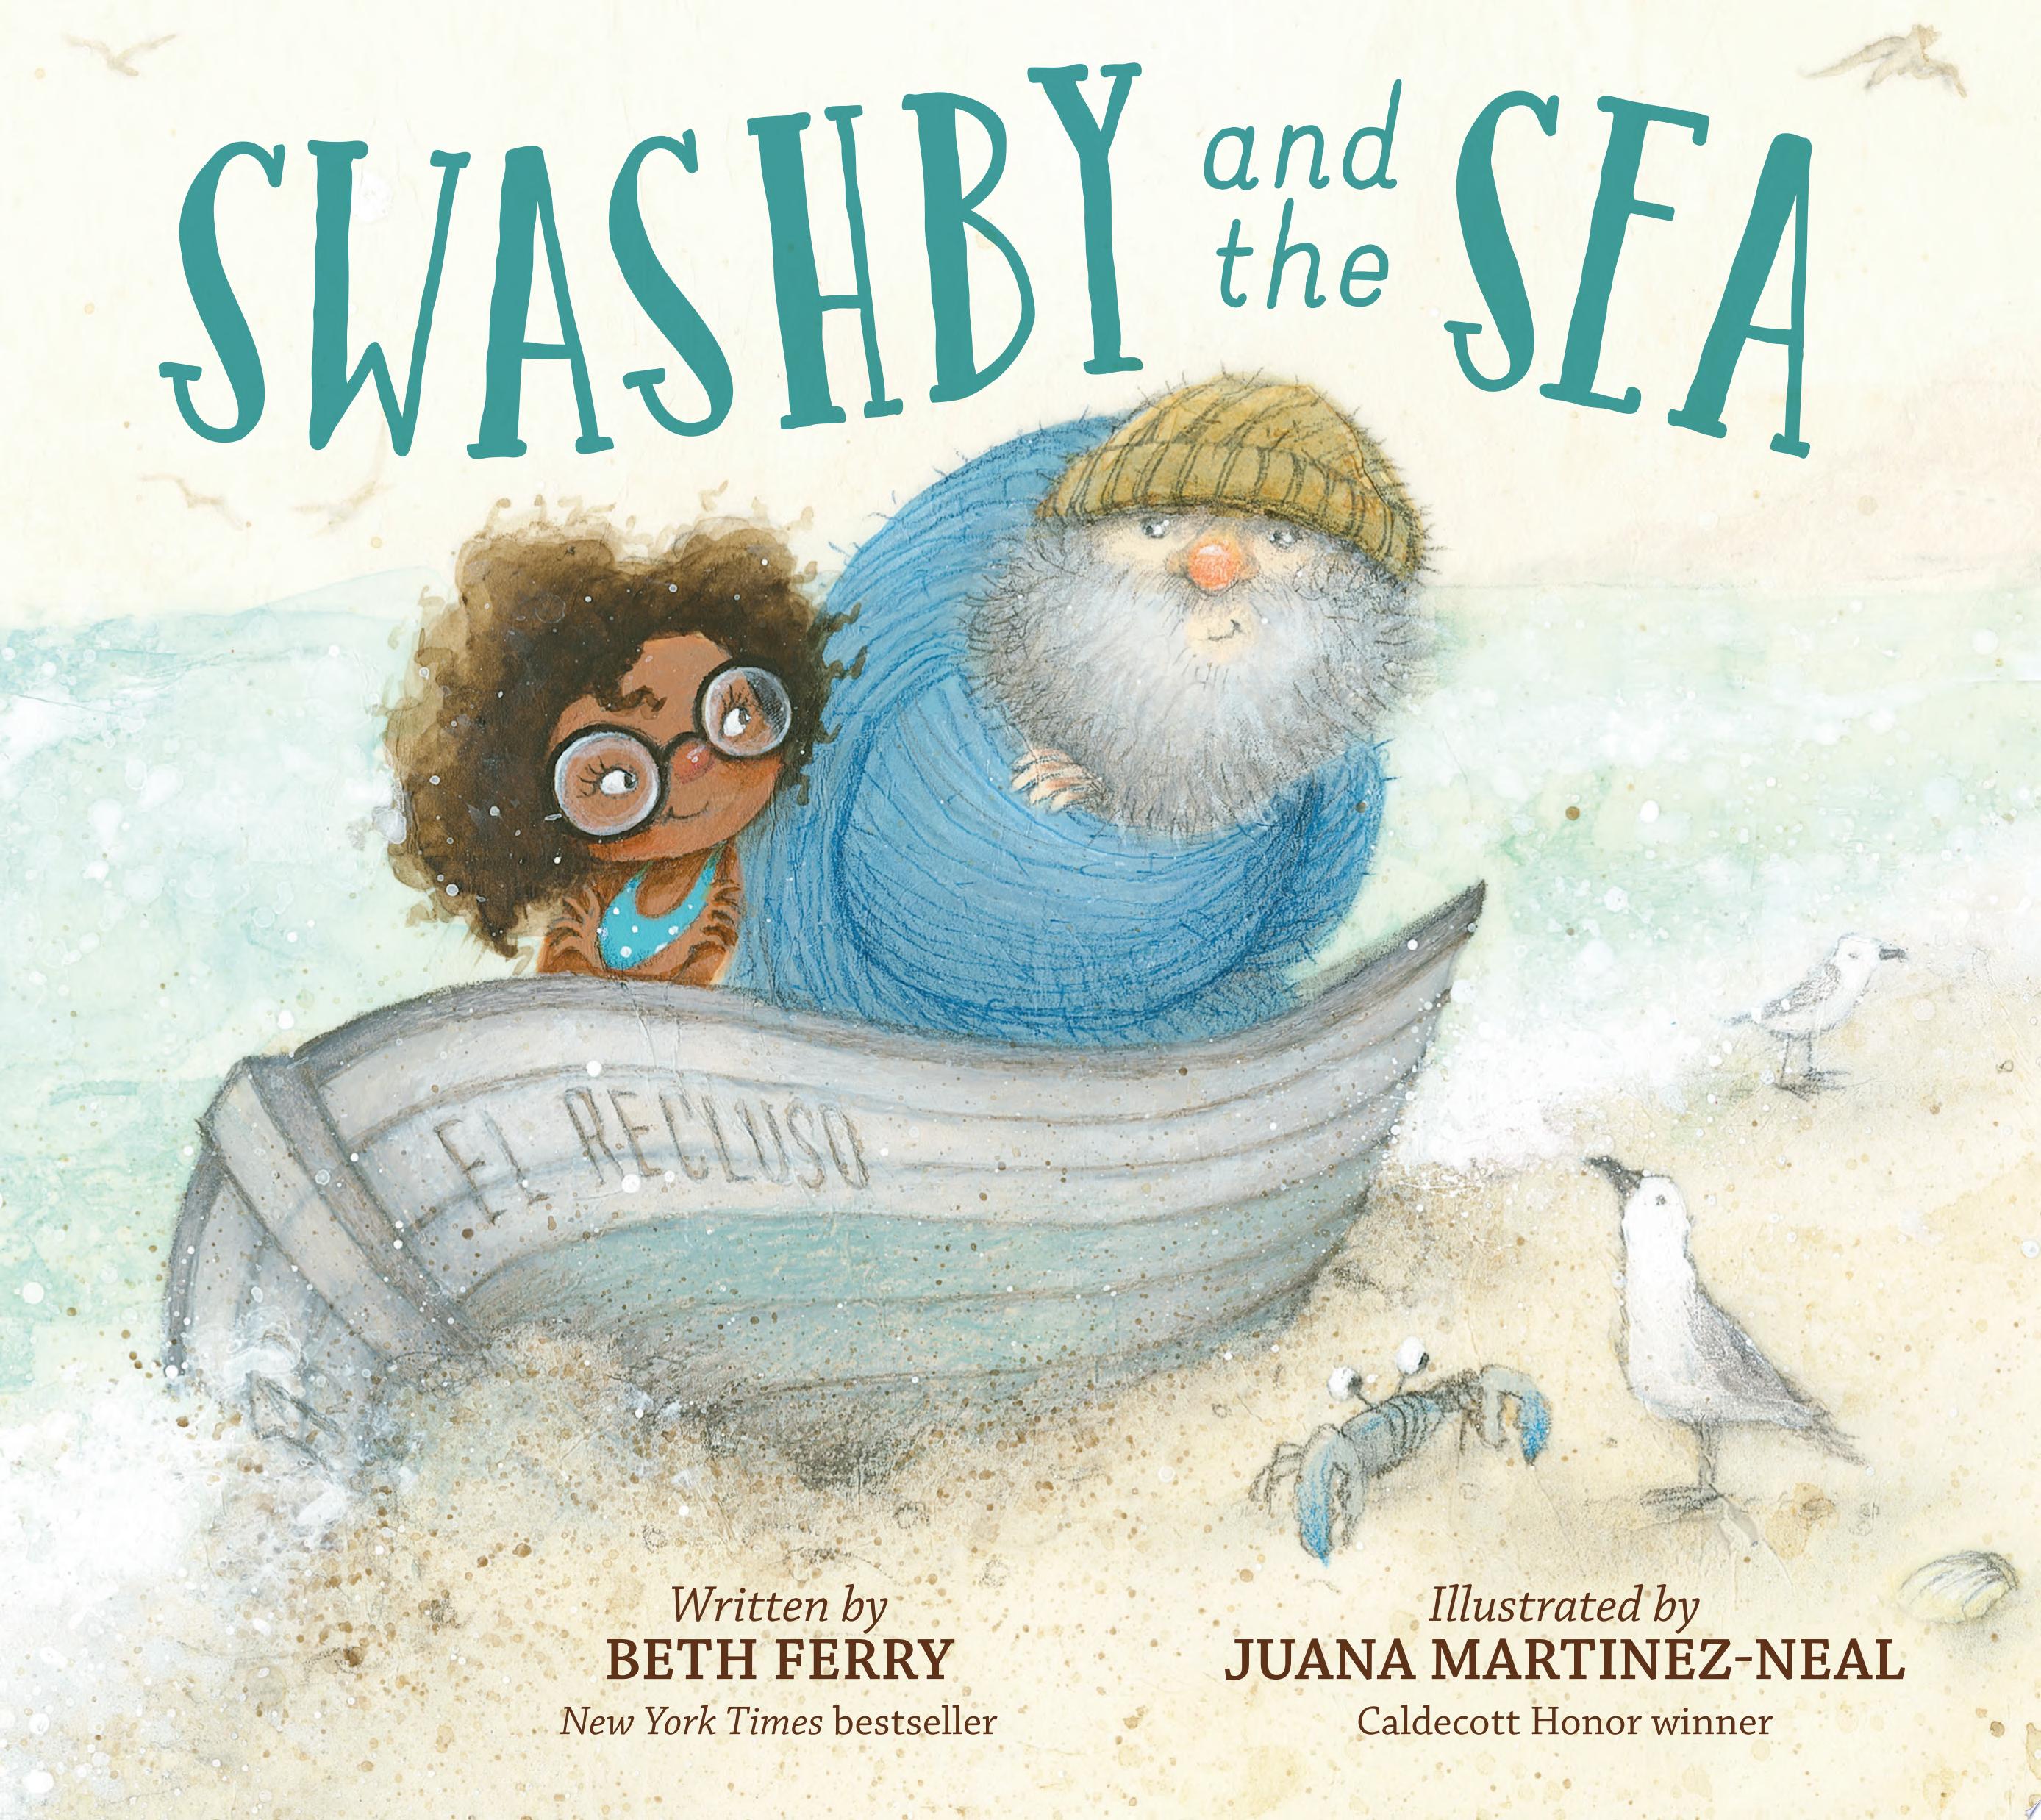 Image for "Swashby and the Sea"